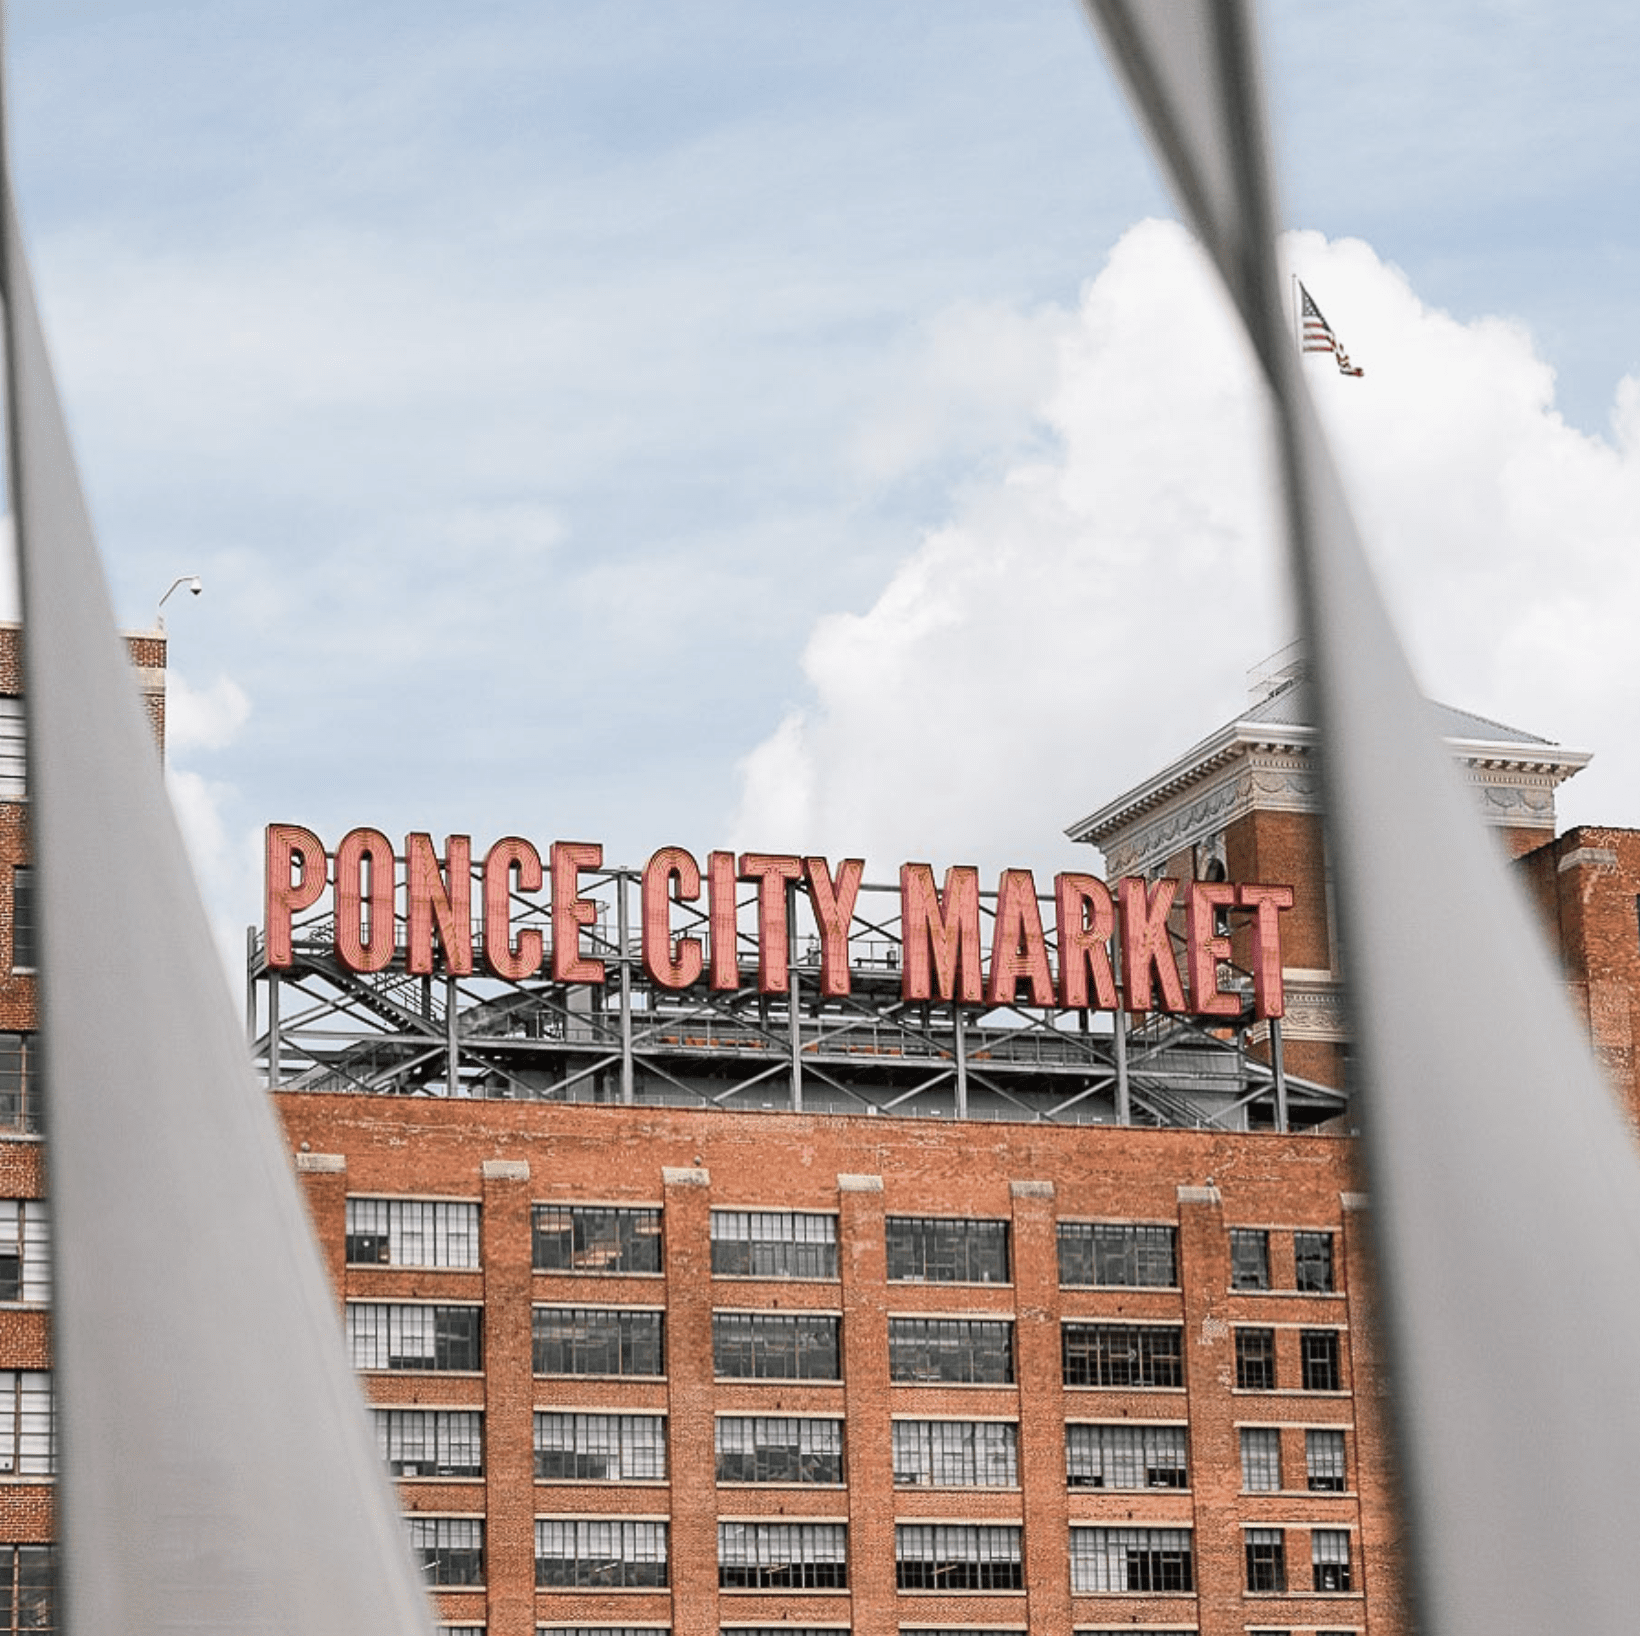 Ponce City Market, Louisville, redbrick exterior with bold lettering